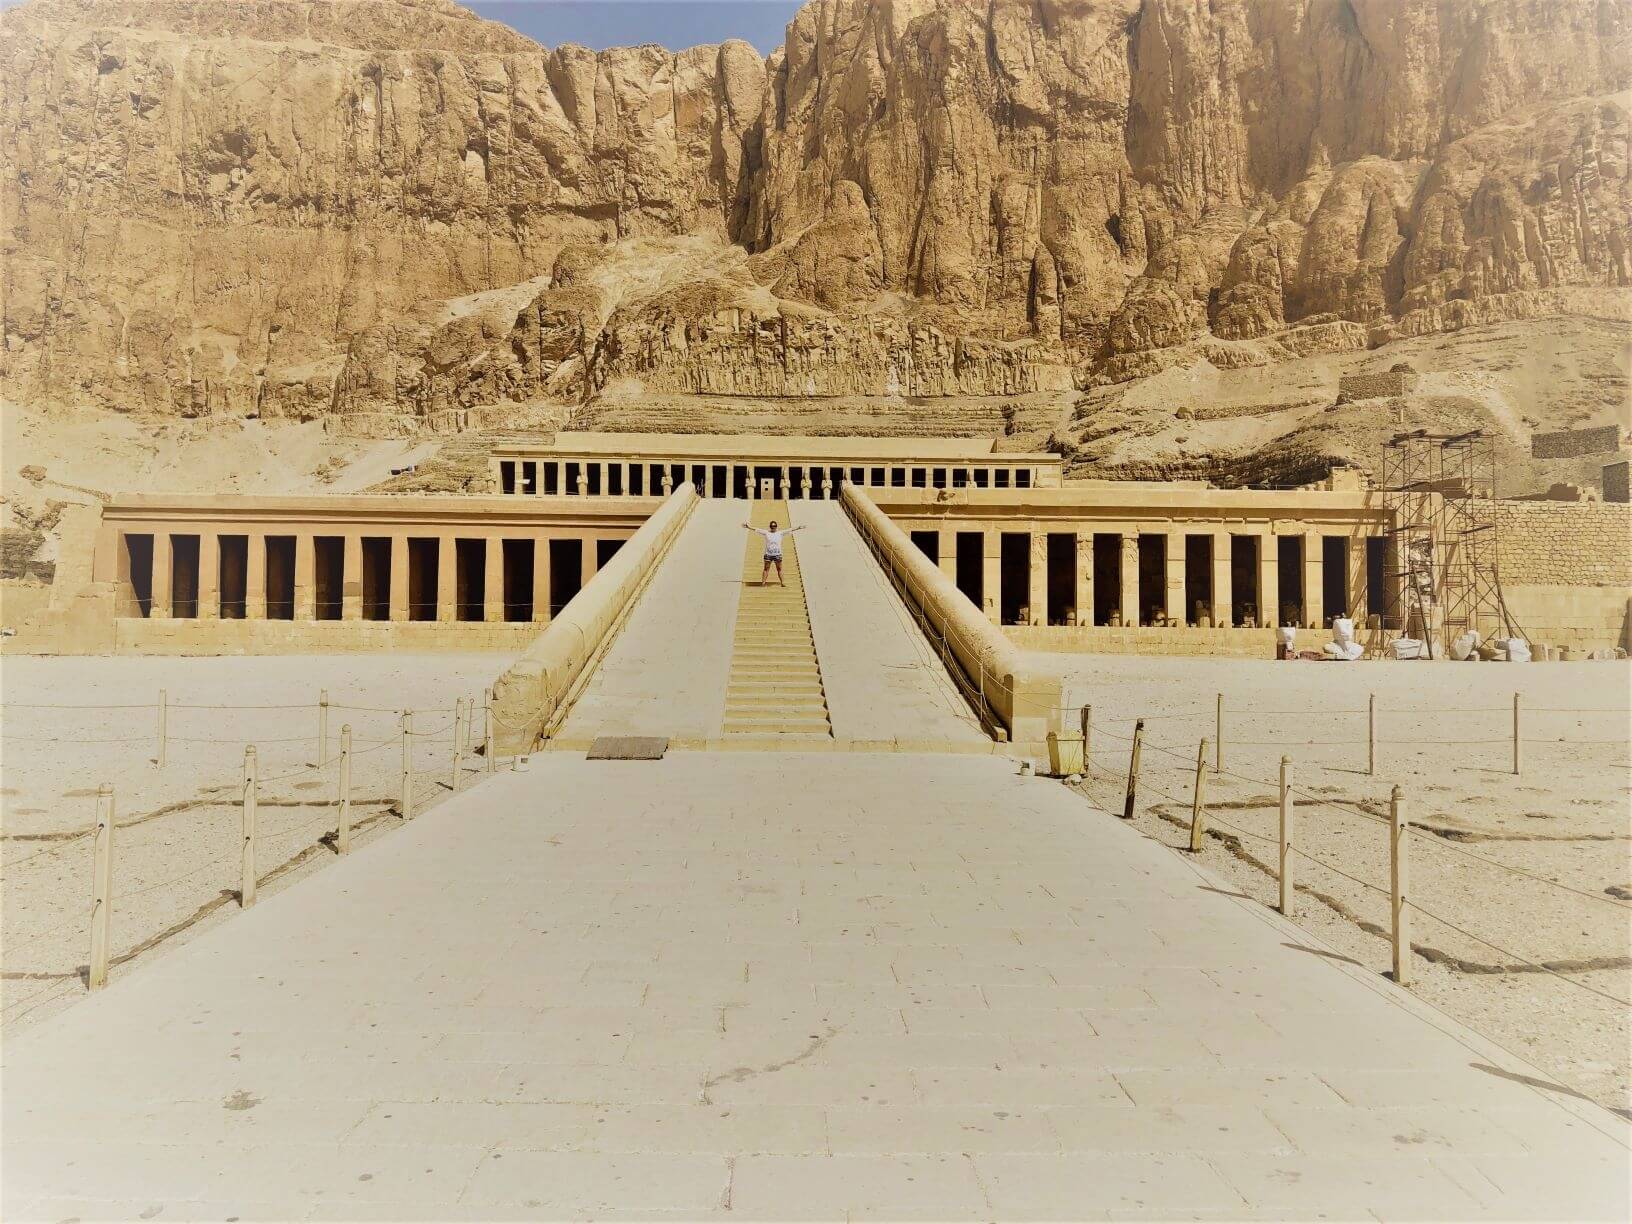 A lady stands on the stairway leading up to Queen Hatshepsut's Palace with arms outspread.